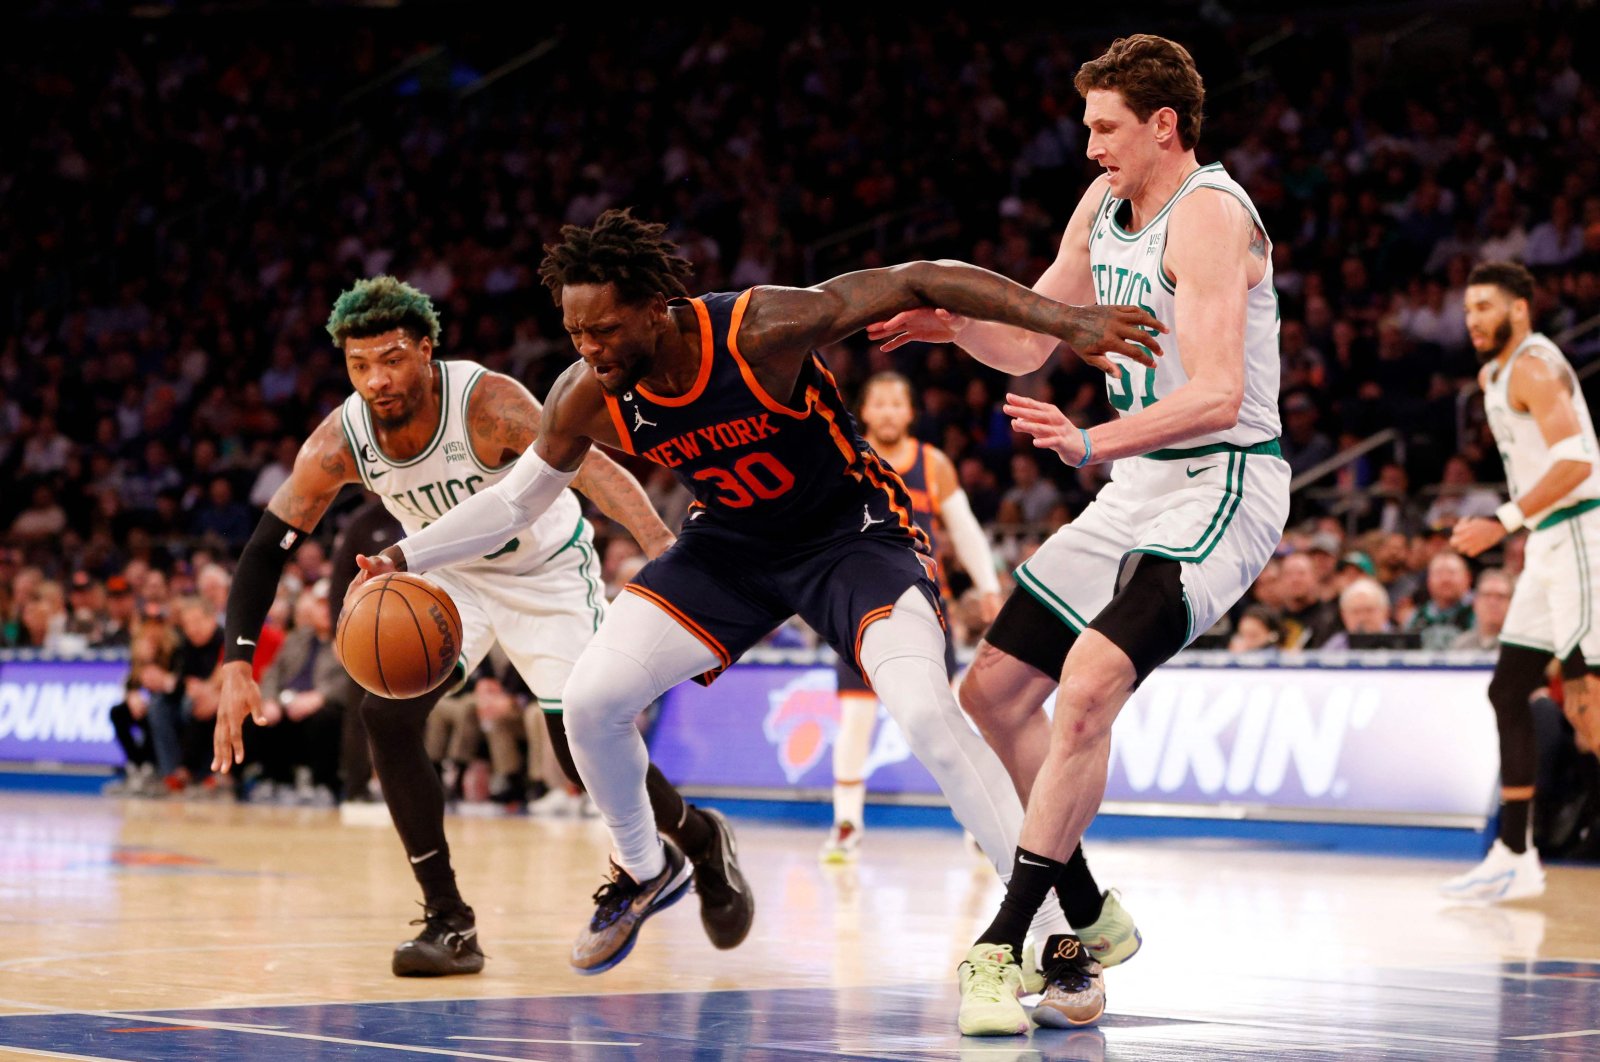 New York Knicks&#039; Julius Randle (C) in action with Boston Celtics&#039; Marcus Smart (L) and Mike Muscala (R), 2nd half at Madison Square Garden, New York City, U.S., Feb. 27, 2023. (AFP Photo)